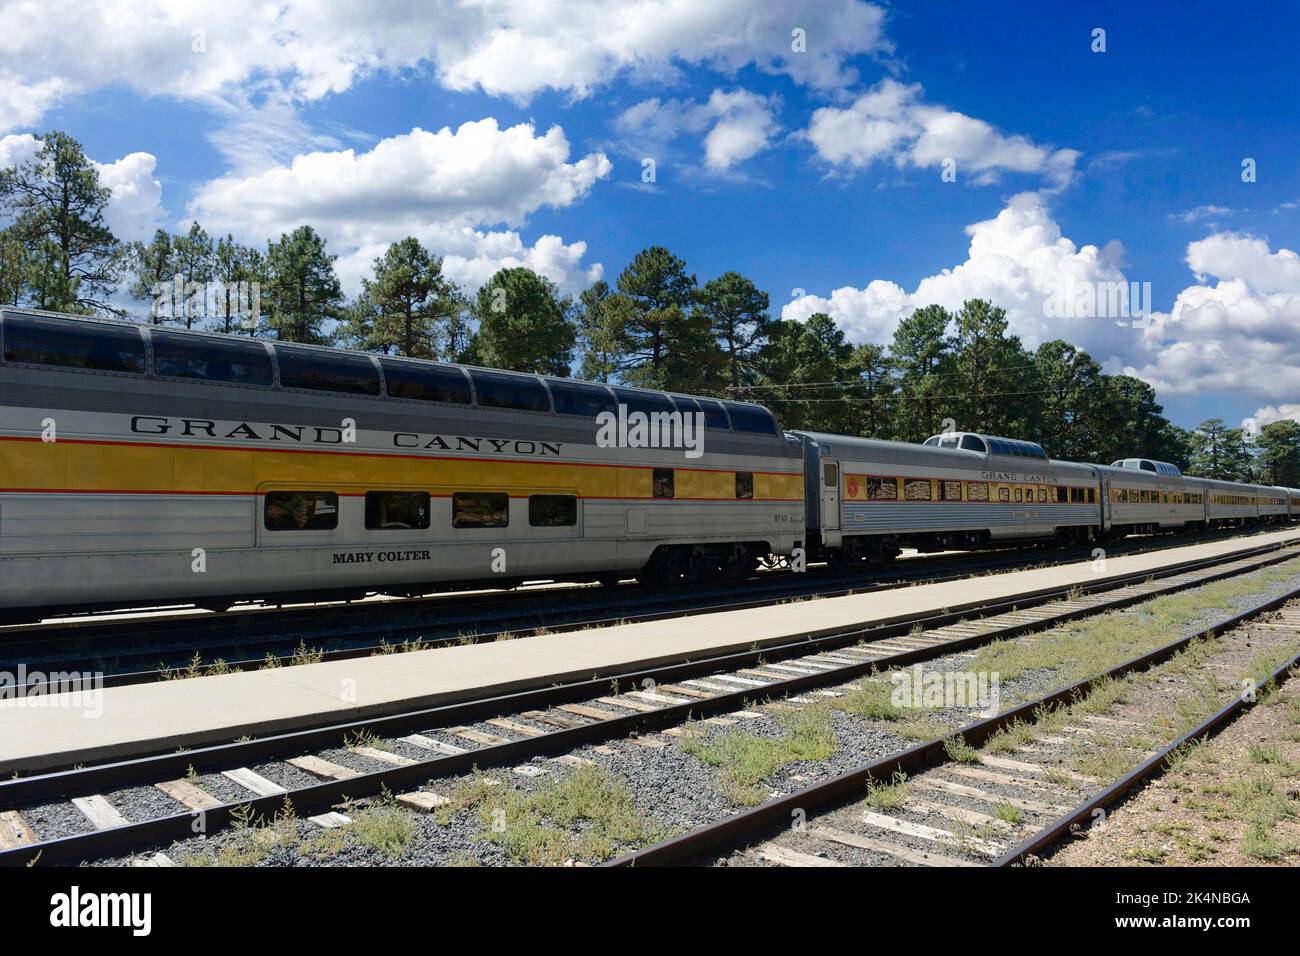 The Grand Canyon Railway silver and gold passenger cars from Williams to the Grand Canyon in Arizona Stock Photo